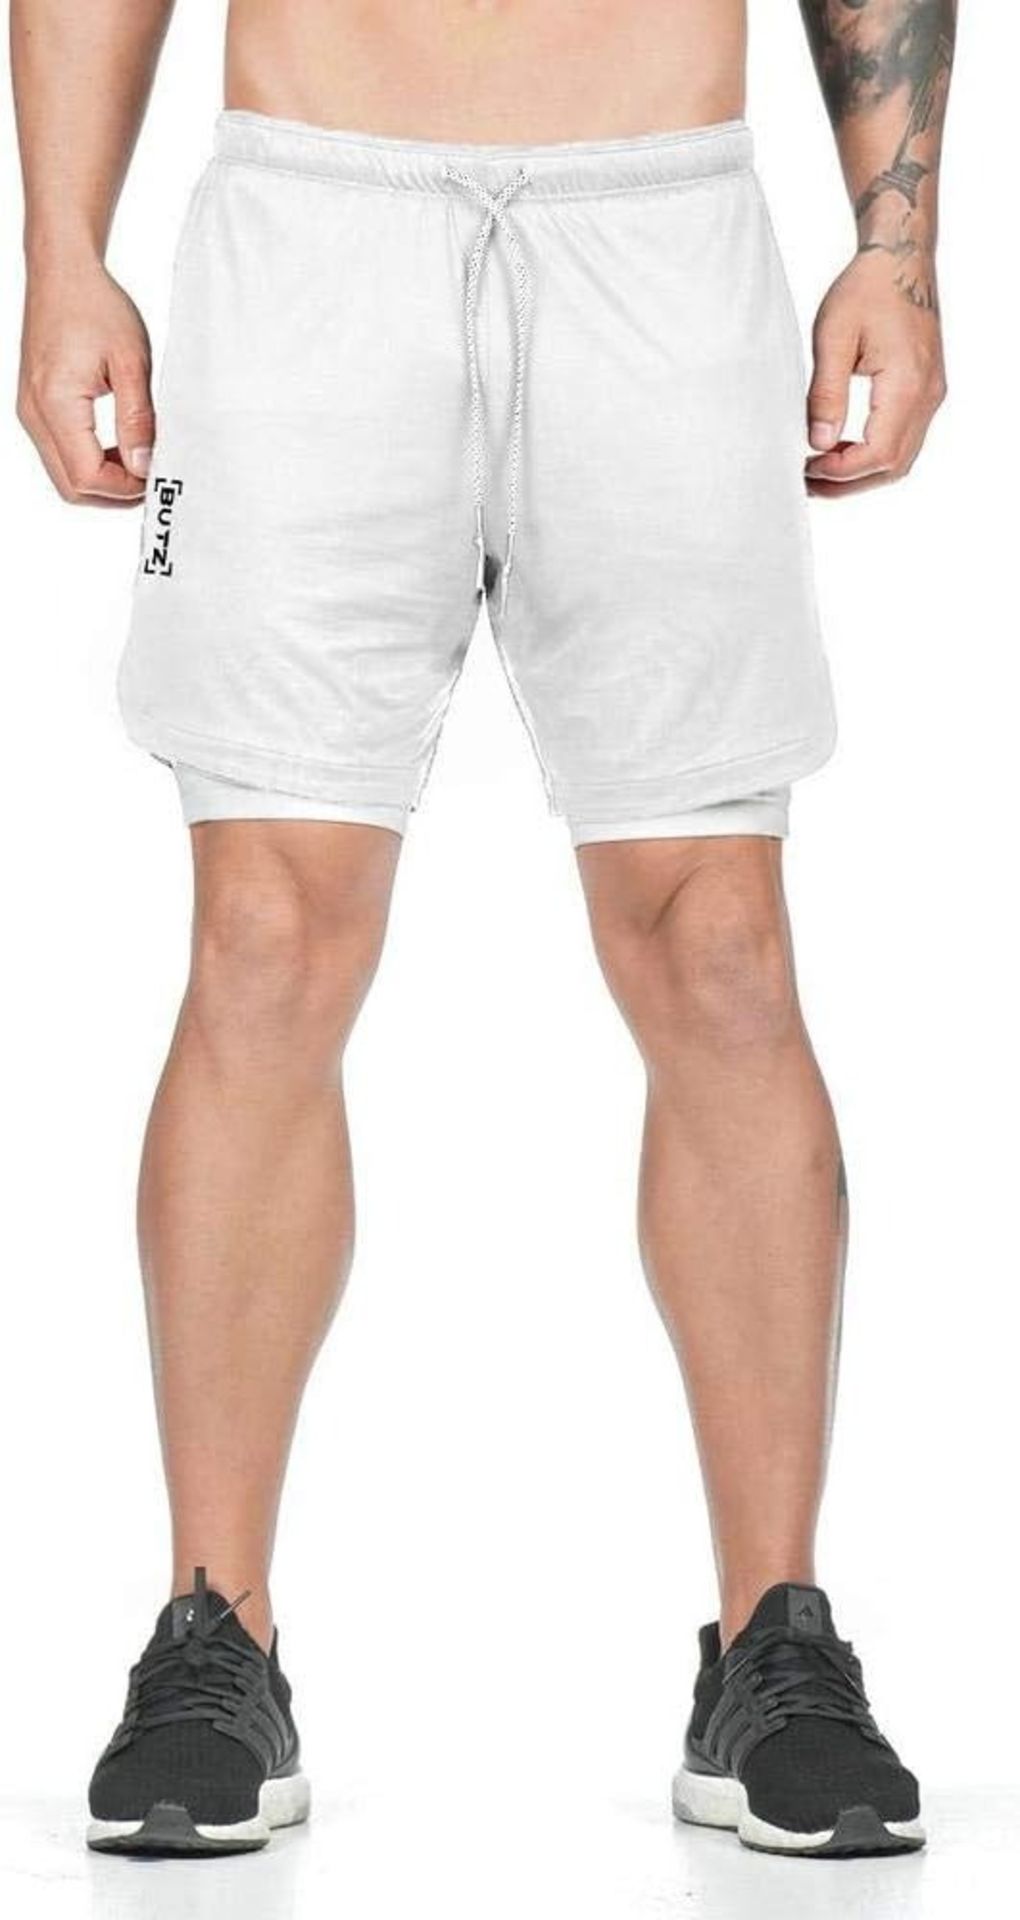 [NEW] Men Workout 2-in-1 Shorts Sports Quick-Drying Running Training Double-Layer Fitn